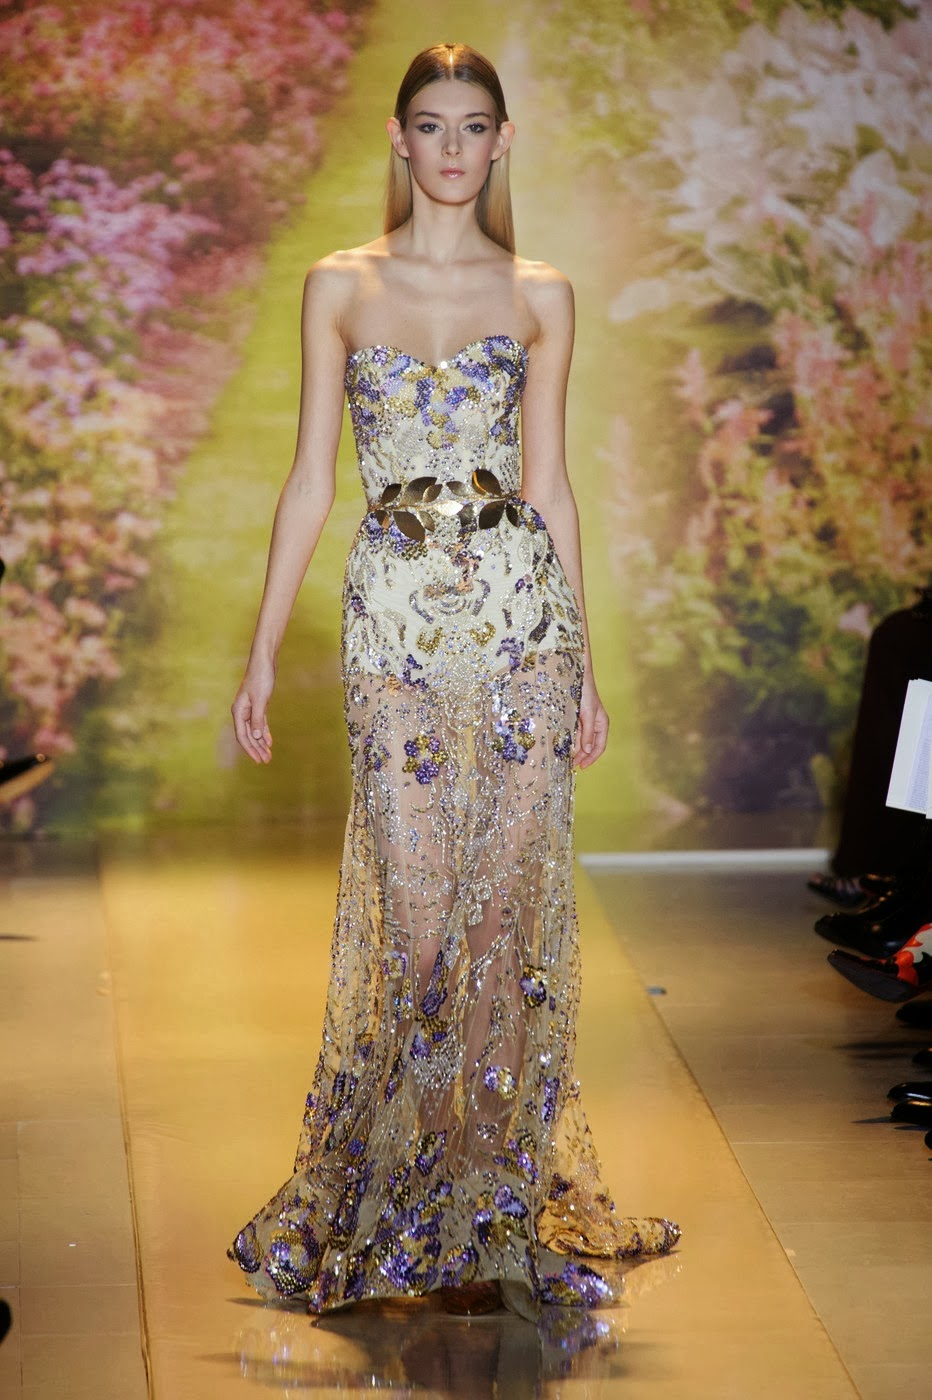 It's Girly Blog: Fashion | Zuhair Murad Haute Couture Spring/Summer 2014